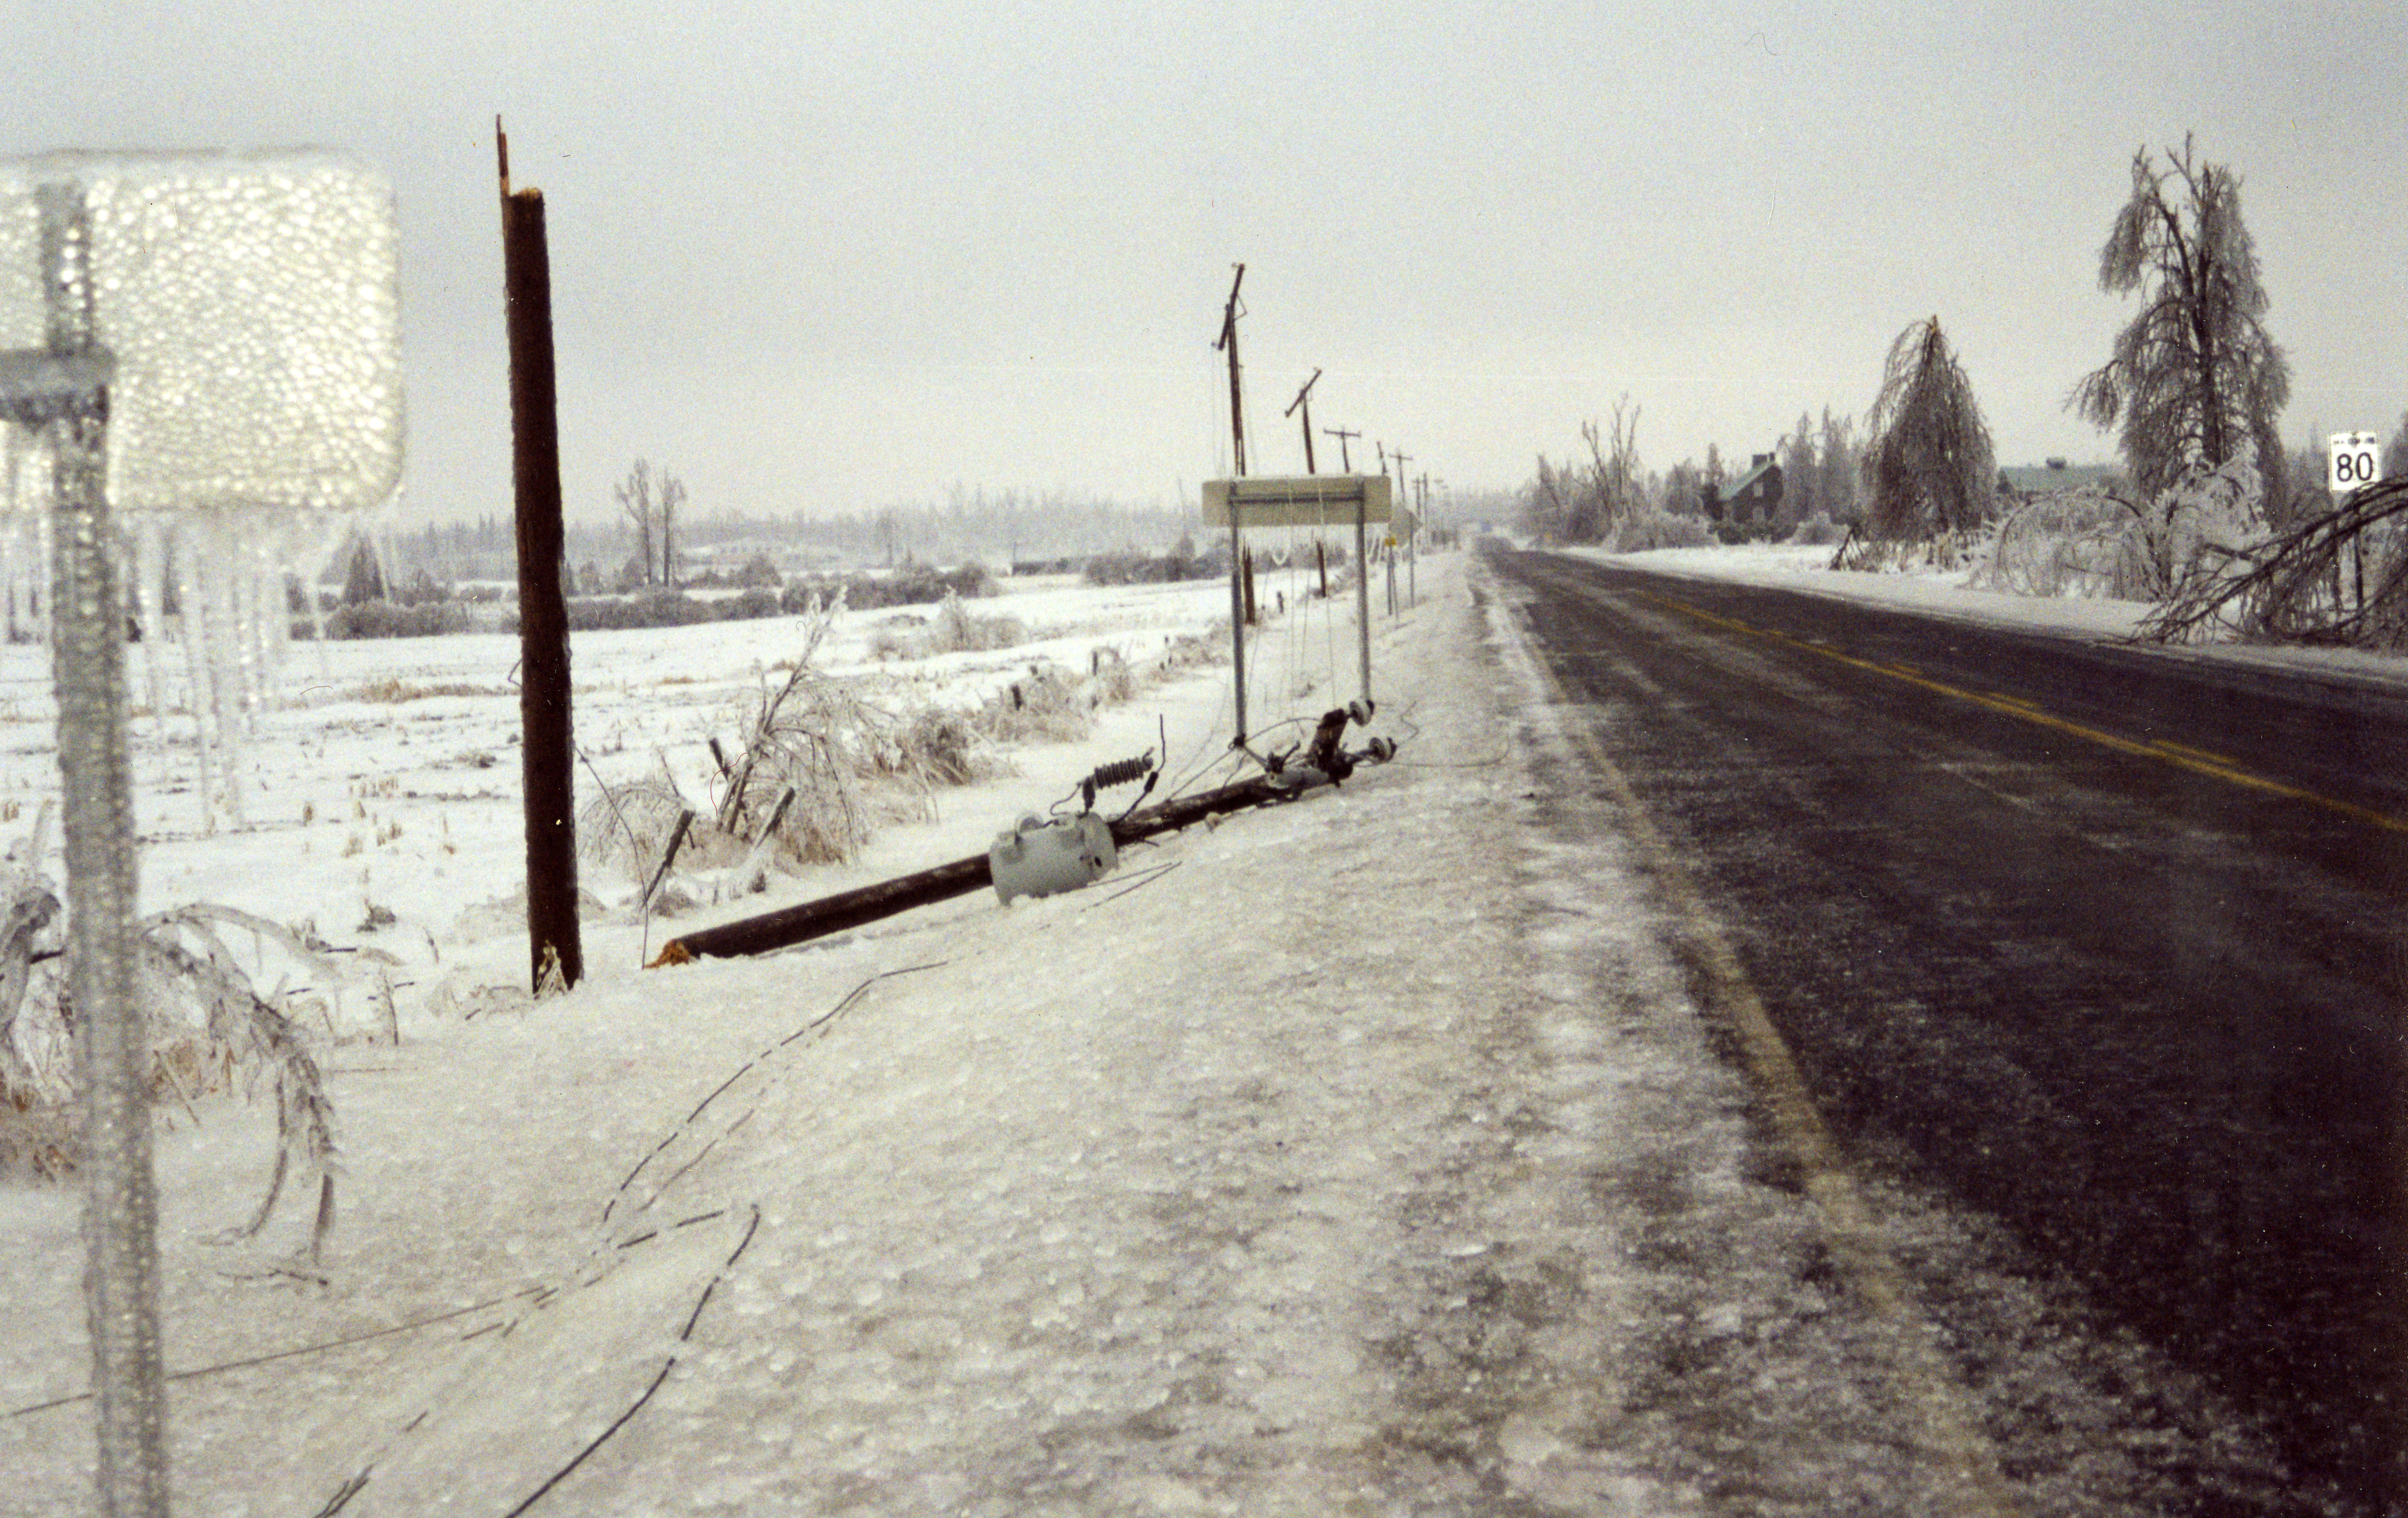 The electrical wires covered in ice dragged the electrical poles down.